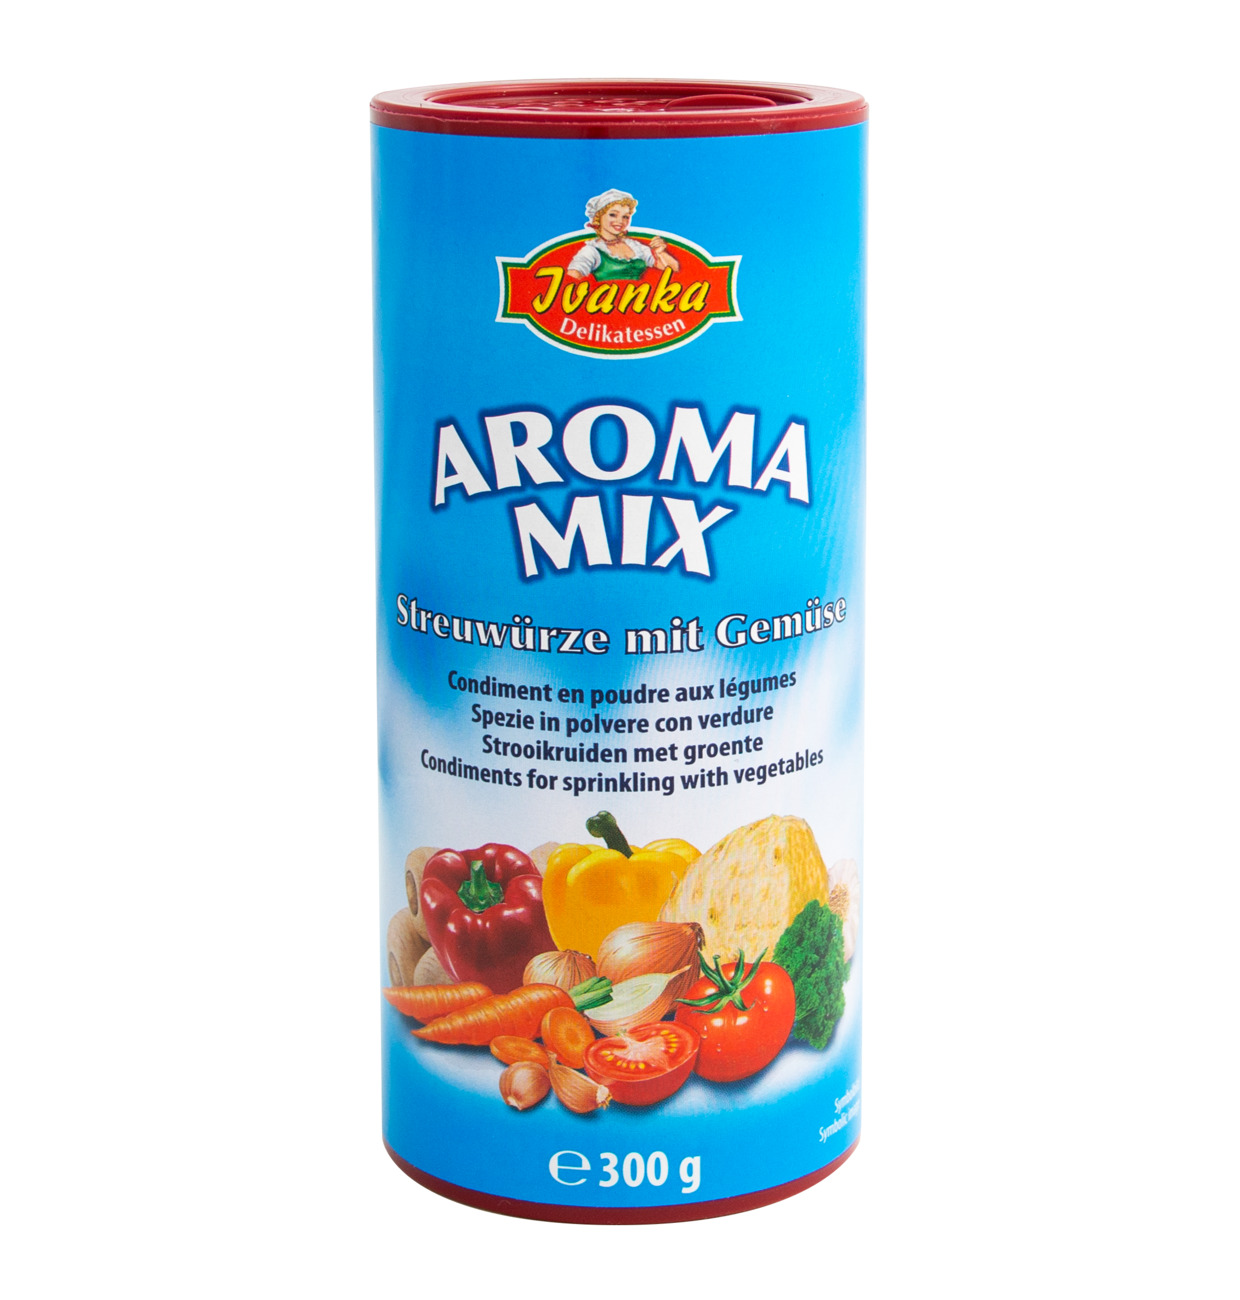 Ivanka Aroma mix condiments for sprinkling 300g